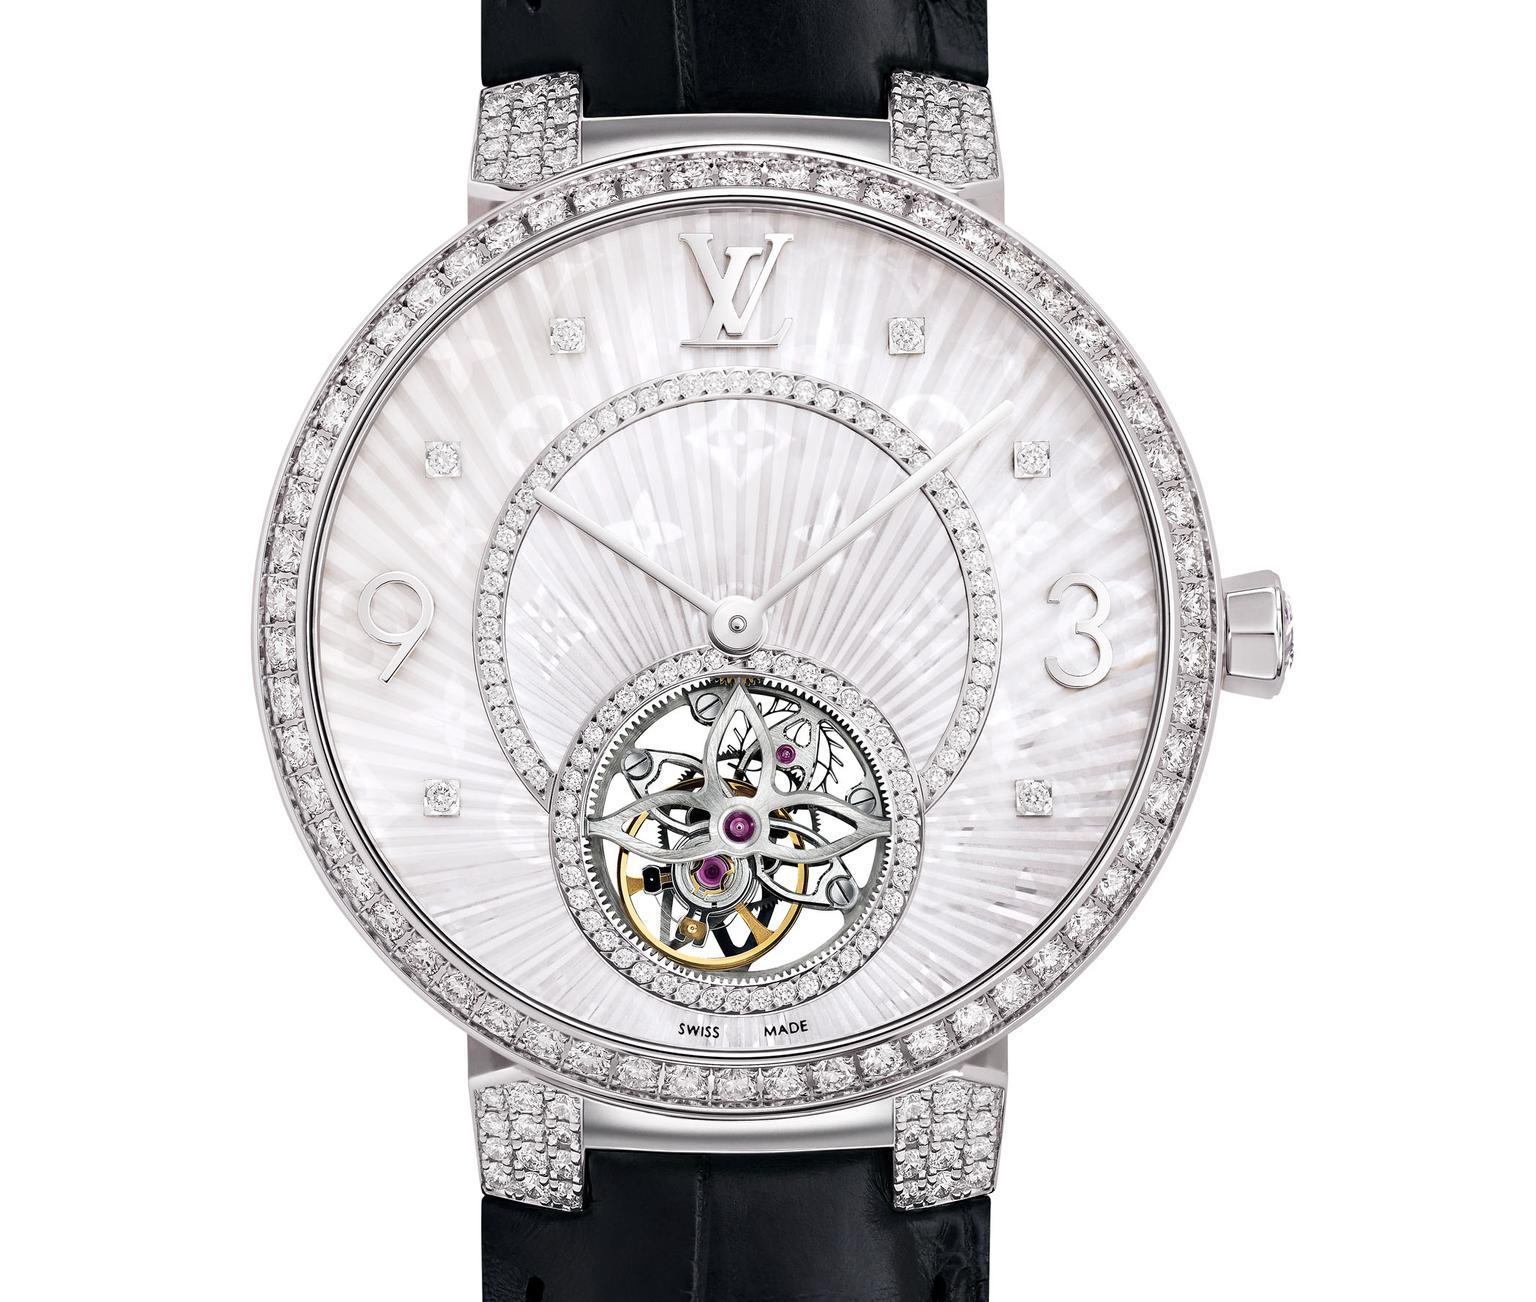 Louis Vuitton Tambour Monogram – QBBB95 – 3,000 USD – The Watch Pages